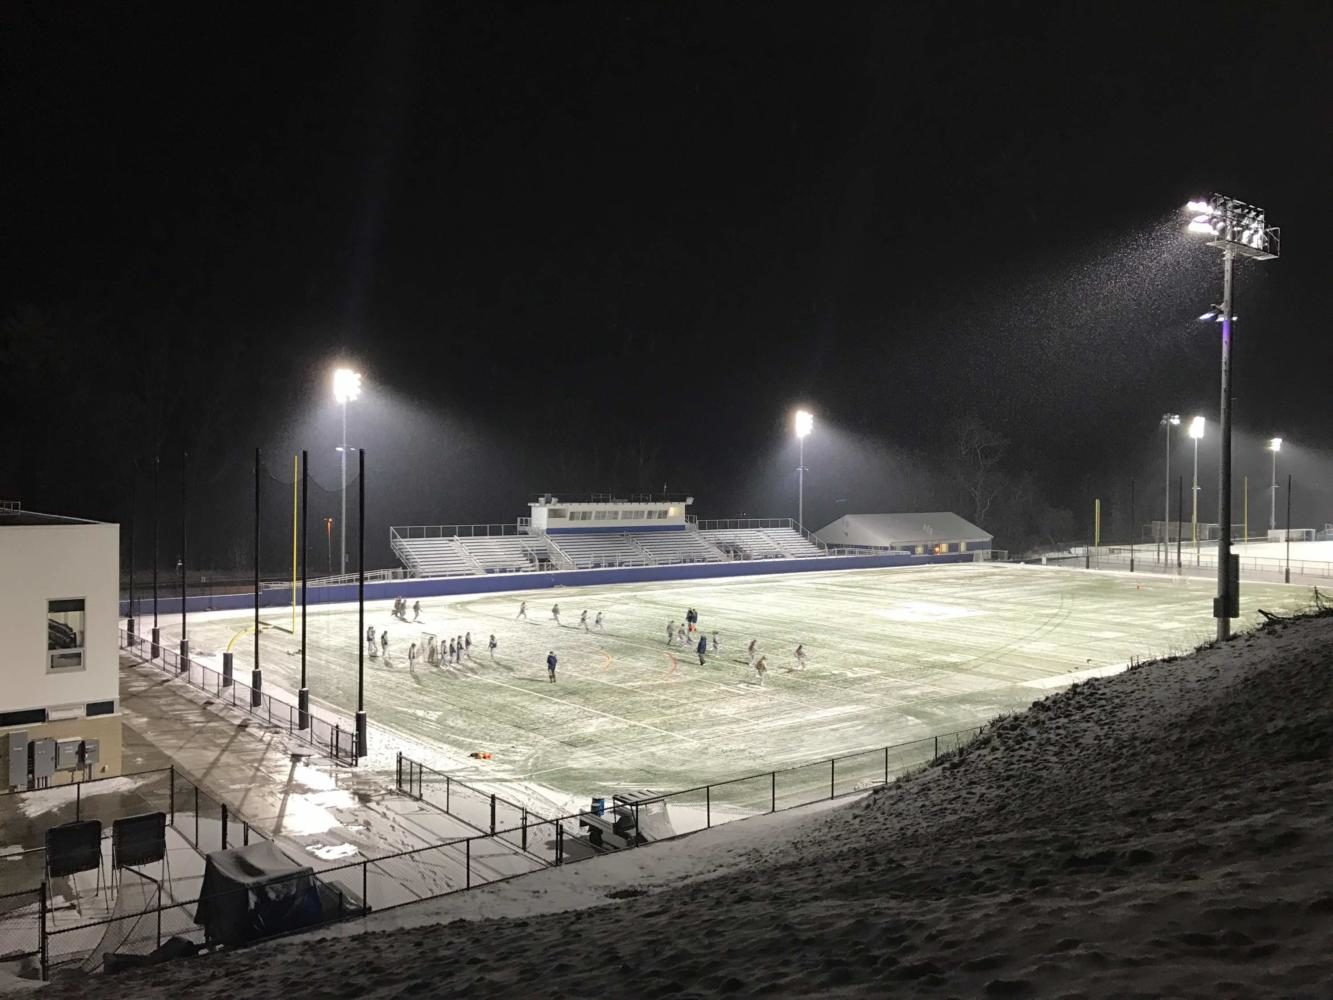 Paces football field at night. Photo by Joseph Tucci